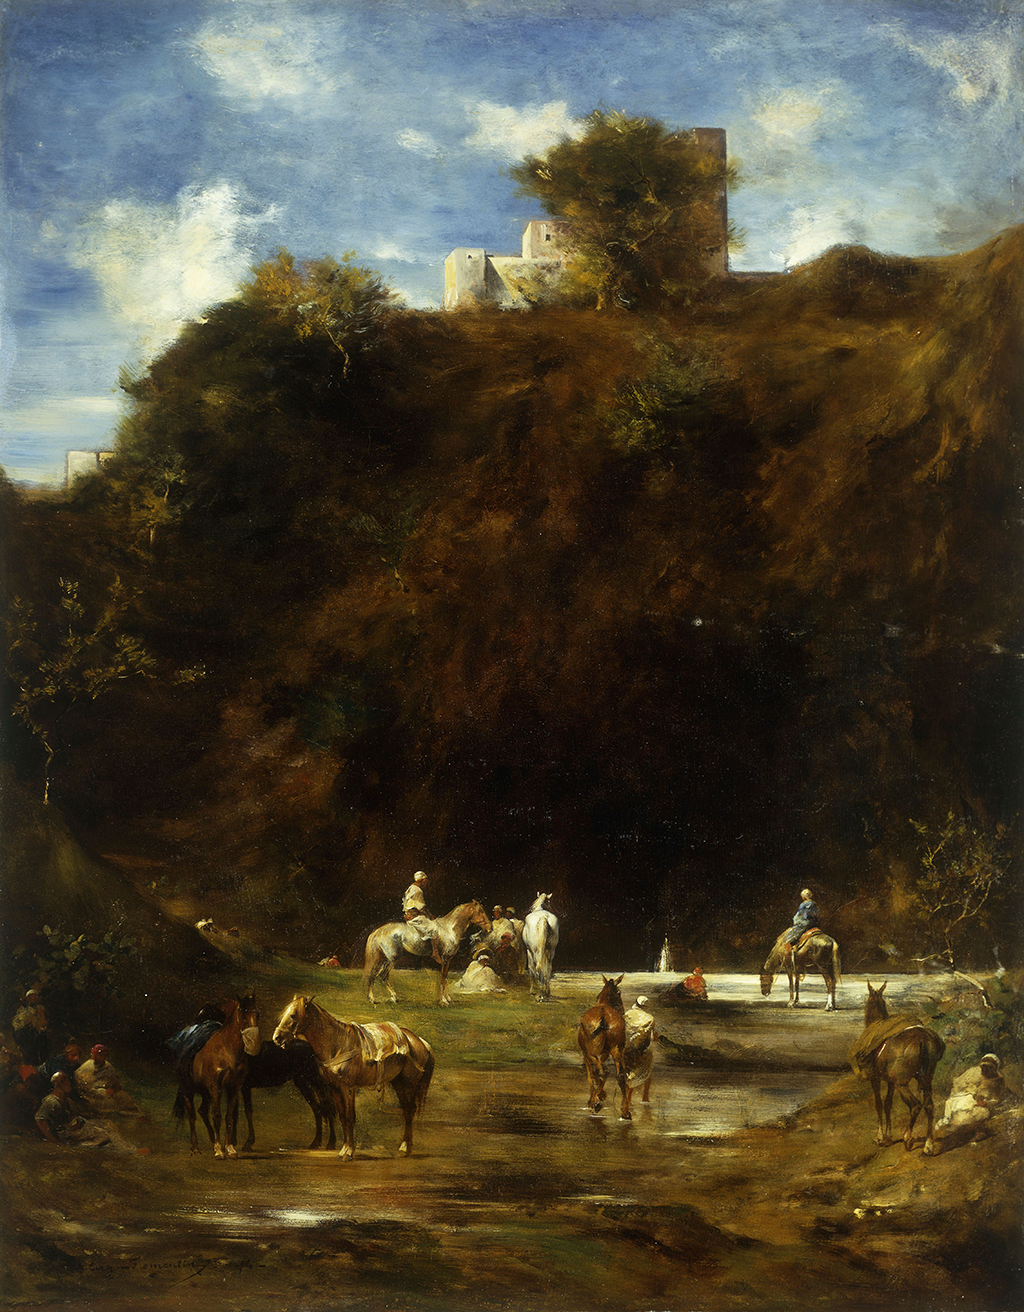 A painting depicts a group of travelers resting beside their brown and white horses on the bank near a stream. Above them is a steep brown hill with a white building partially blocked by a green tree.